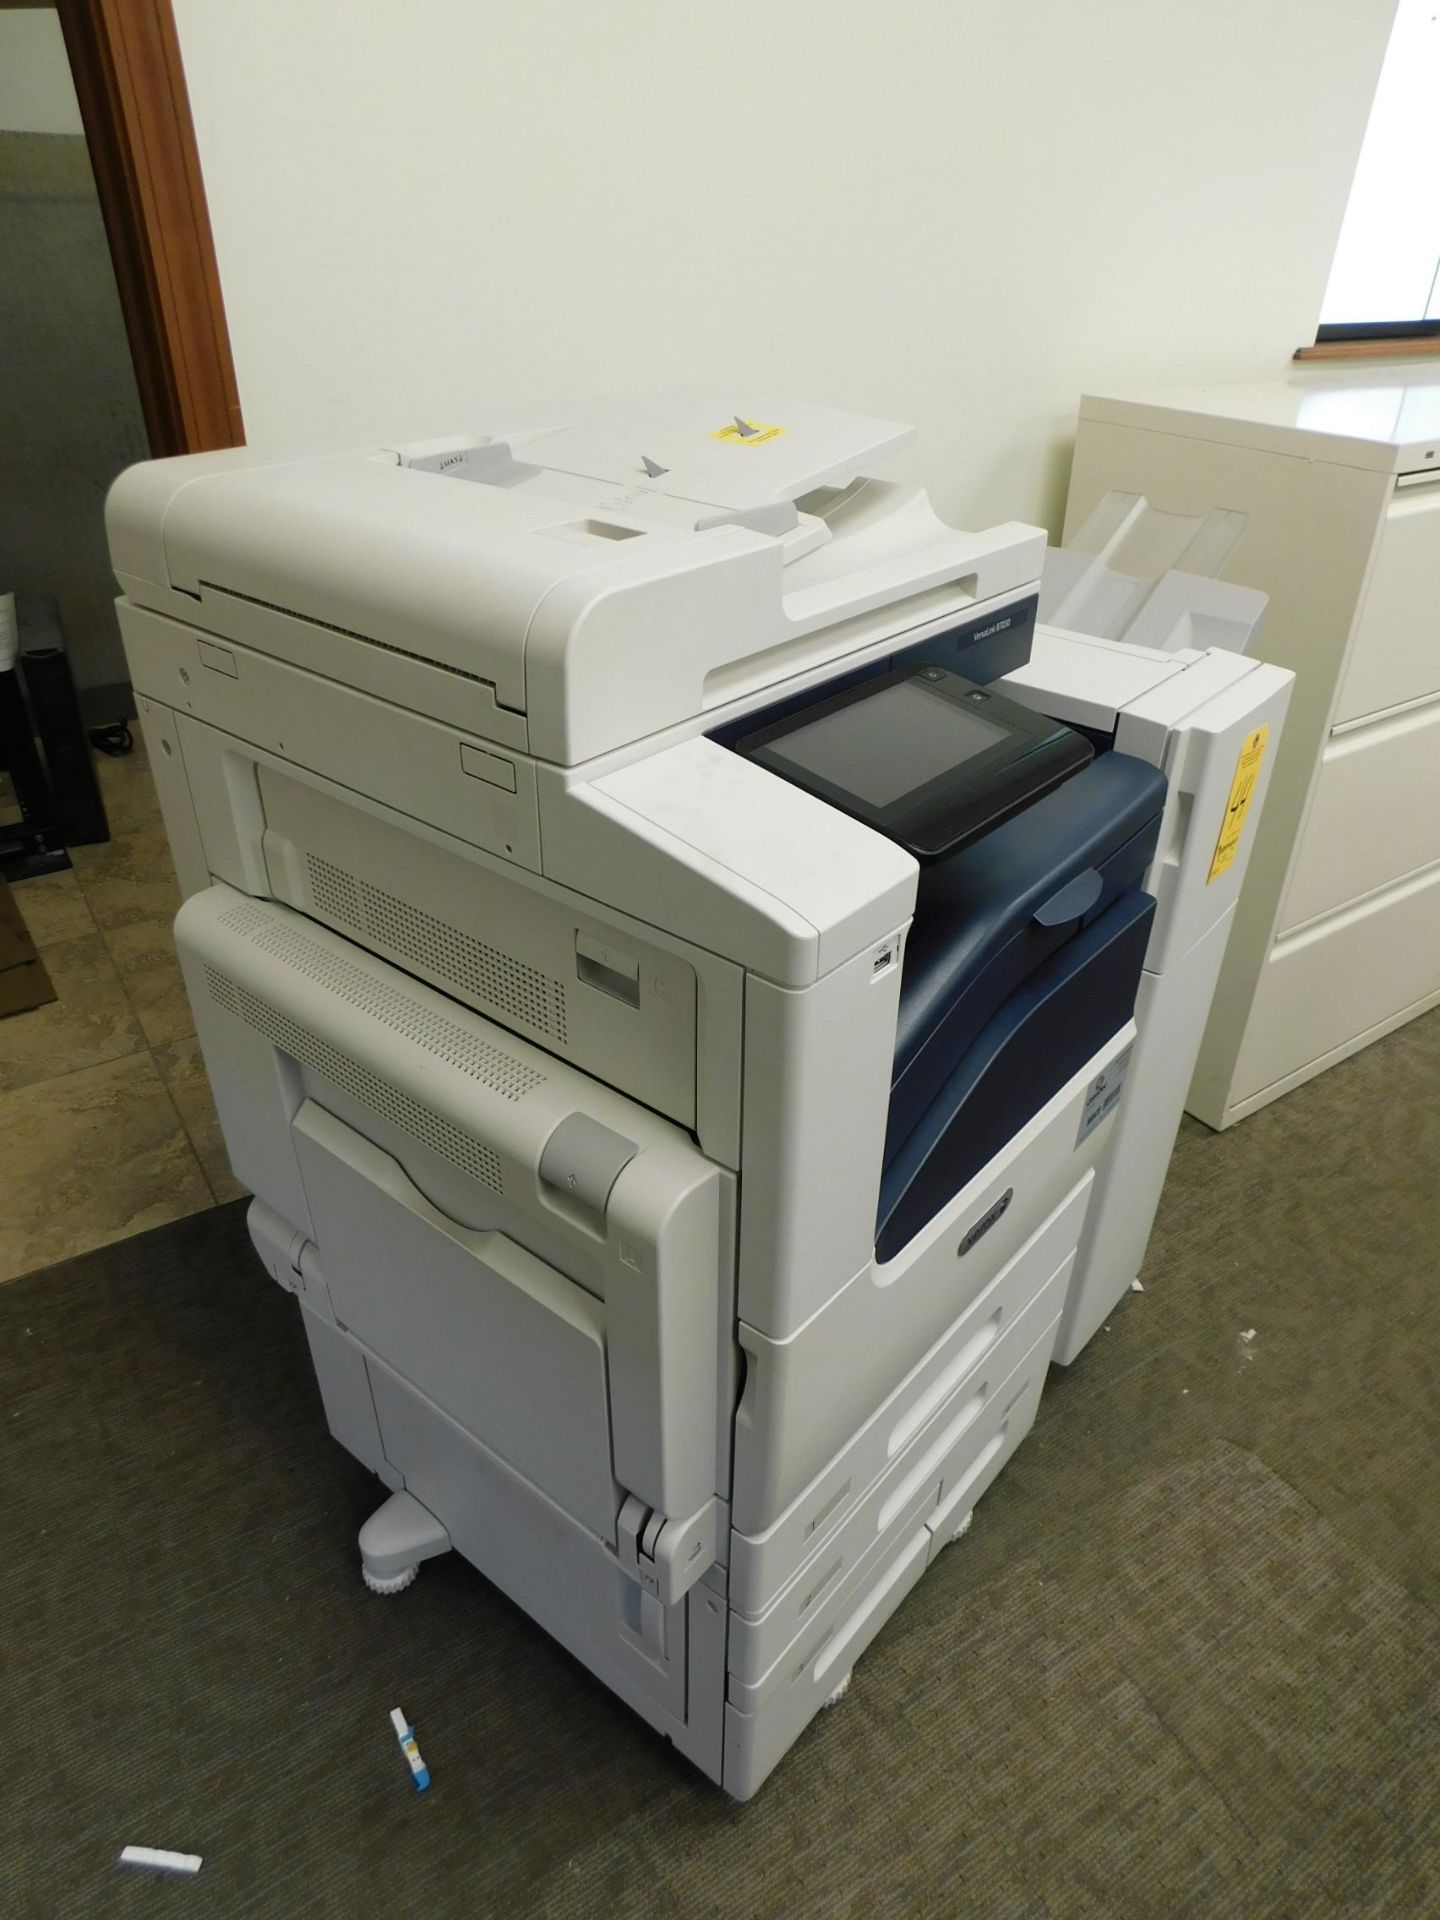 Xerox Model FX2A - FAX, Location 1 - 1100 Tower Dr., Fort Loramie, OH 45845 - Image 3 of 4